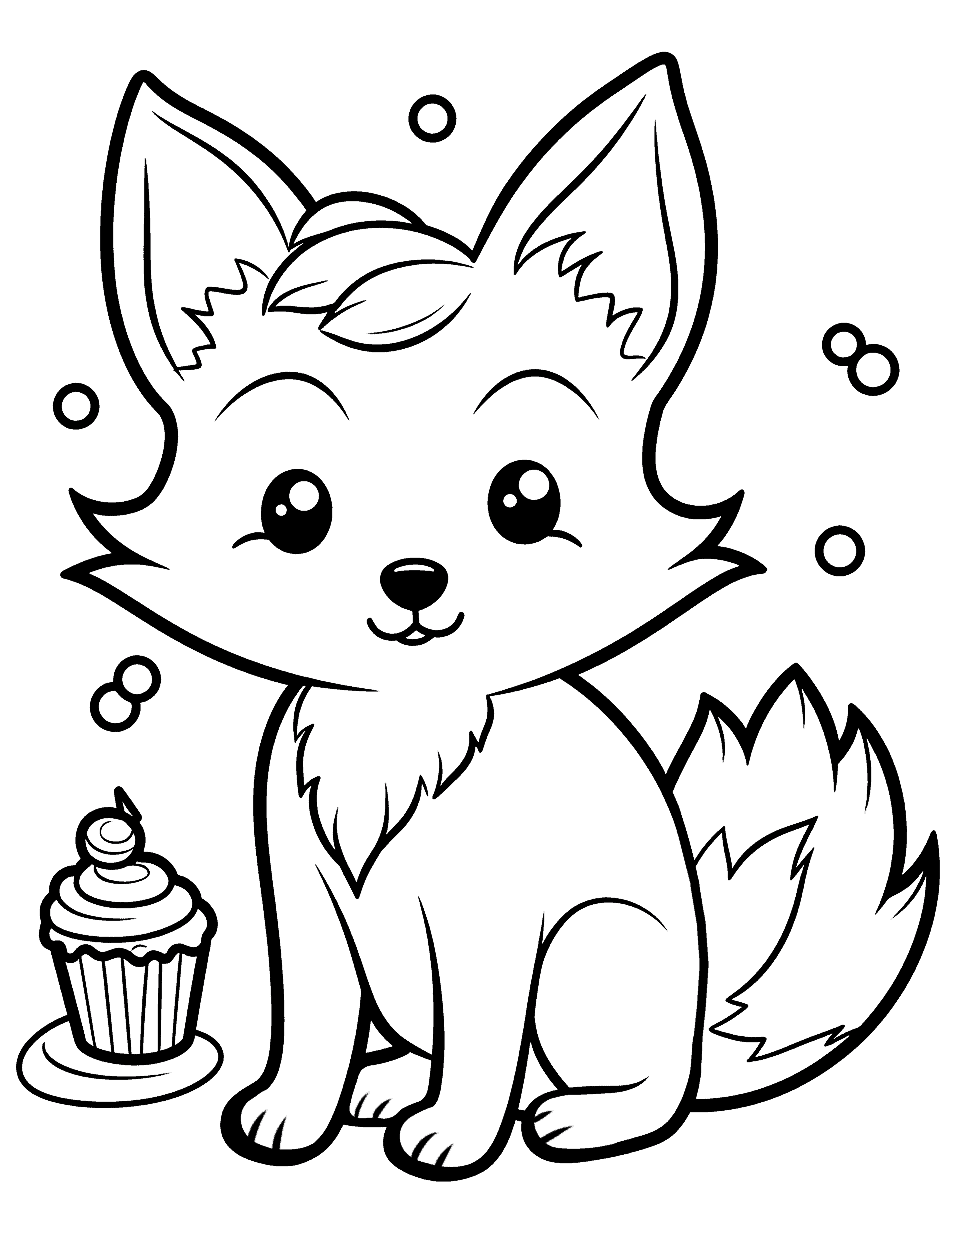 Kawaii Fox With a Cupcake Coloring Page - A small, round fox with big sparkly kawaii eyes and a colorful cupcake.